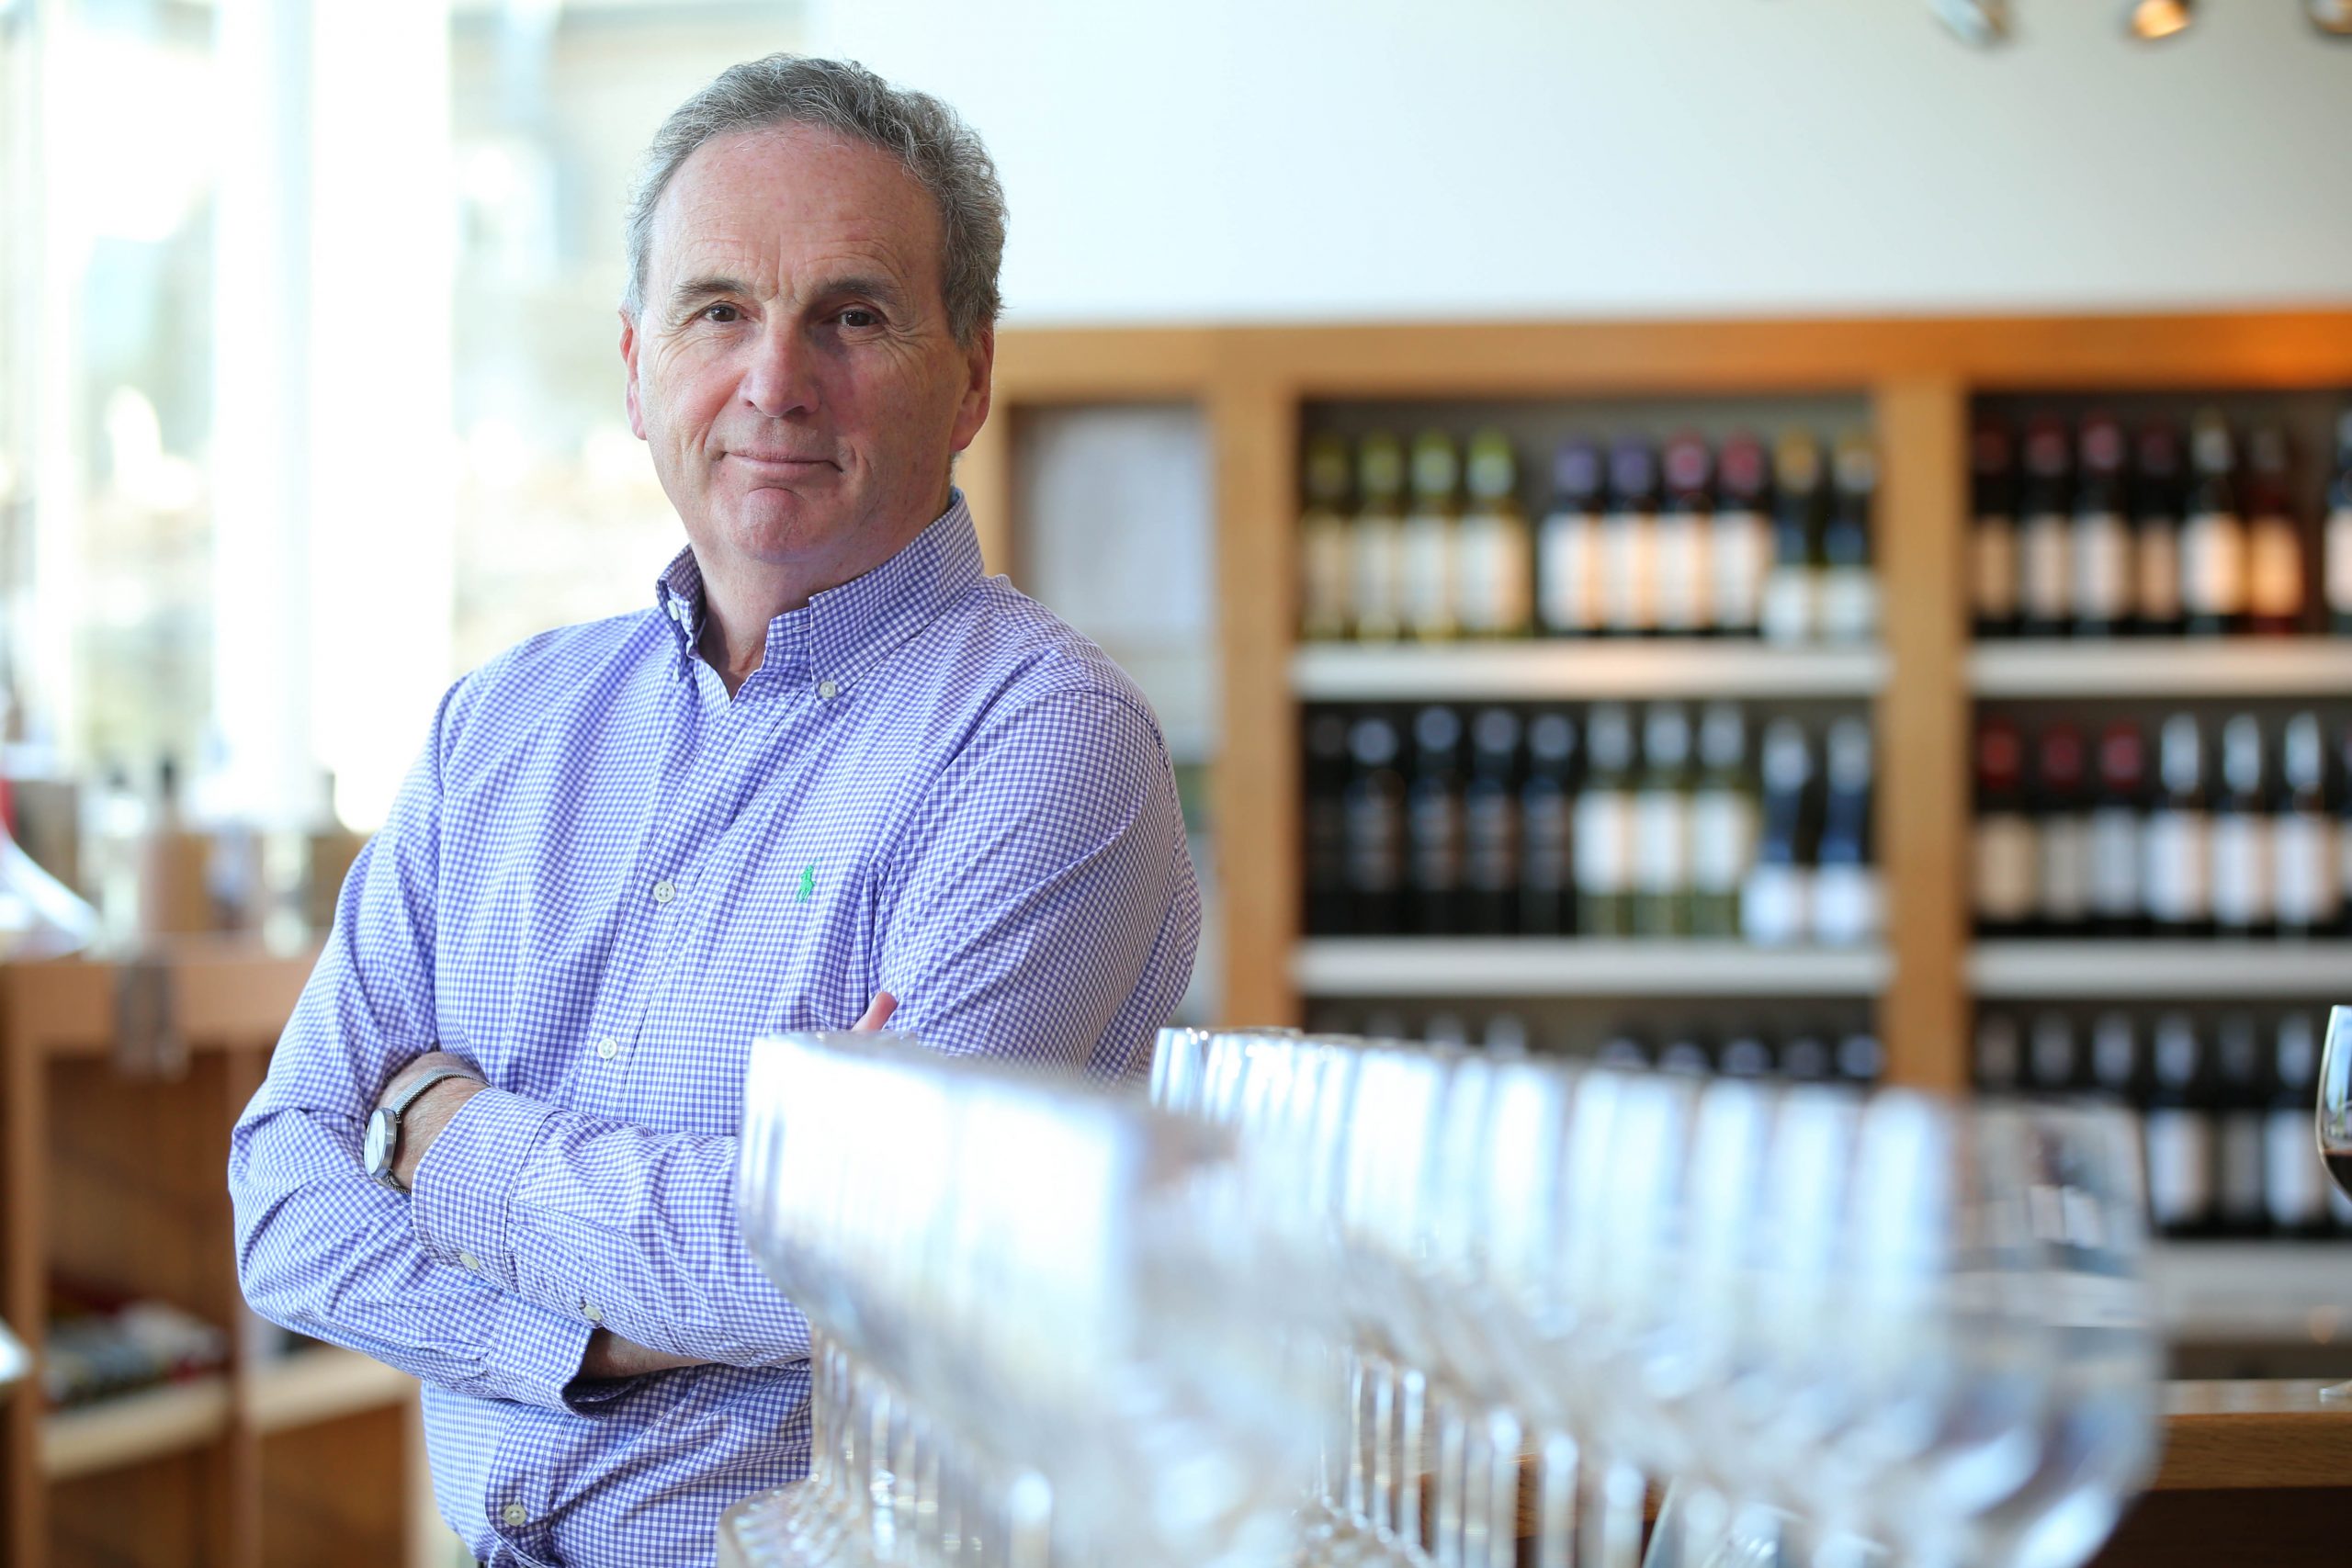 Hospitality a ‘scapegoat for Covid’, says wine merchant